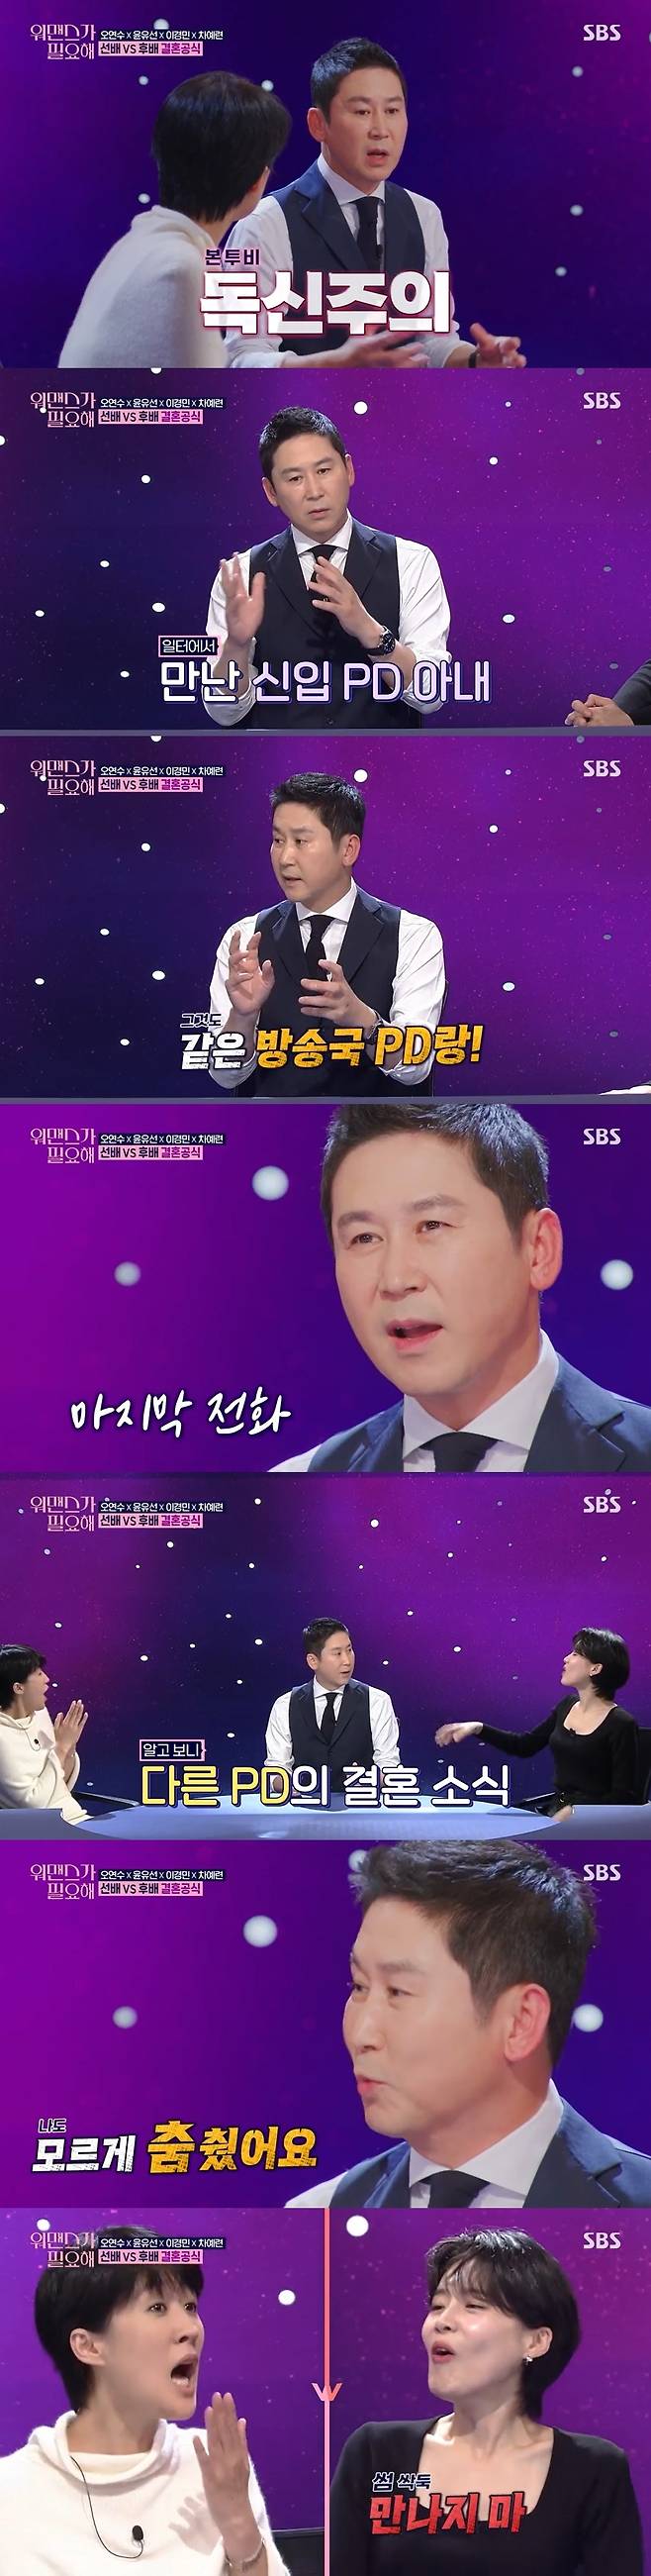 Seoul) = Shin Dong-yup has released a love story with his wife Sun Hye-yun PD.In the SBS entertainment program One Mans War is needed broadcasted on the last 7 days, MC Shin Dong-yup asked, Did you recognize the person to marriage at a glance?Shin Dong-yup said, I did not think about marriage and thought I should live with my close friends around me.But after meeting Sun Hye-yun PD, my thoughts changed.Shin Dong-yup said, I met my wife on the air for a while as a new PD, and I kept thinking about it.But one day, I am marriageing, with the same broadcasting station PD. Shin Dong-yup thought it was the last time and called Sun Hye-yun PD. So I called.I called and congratulated him with a hearty heart, and he said no. It was another woman PD. Shin Dong-yup said, Youre so strong.I got it ~ and I danced without knowing it. He said that he could confirm his real mind because of the rumor of marriage.He said, I called the other PD and talked to him once when I ate at my house.But then (wife) was on a thumb with Blind date man, he said. Blind date man says its too good, but I told him not to meet. Hong Jin-kyung and Jang Do-yeon were amazed at the powerful appearance of Shin Dong-yup.Meanwhile, One Mans War is needed is a womens relationship reality that observes what synergy occurs when women are united in more than two teams, not alone.It is broadcast every Thursday at 9 p.m.